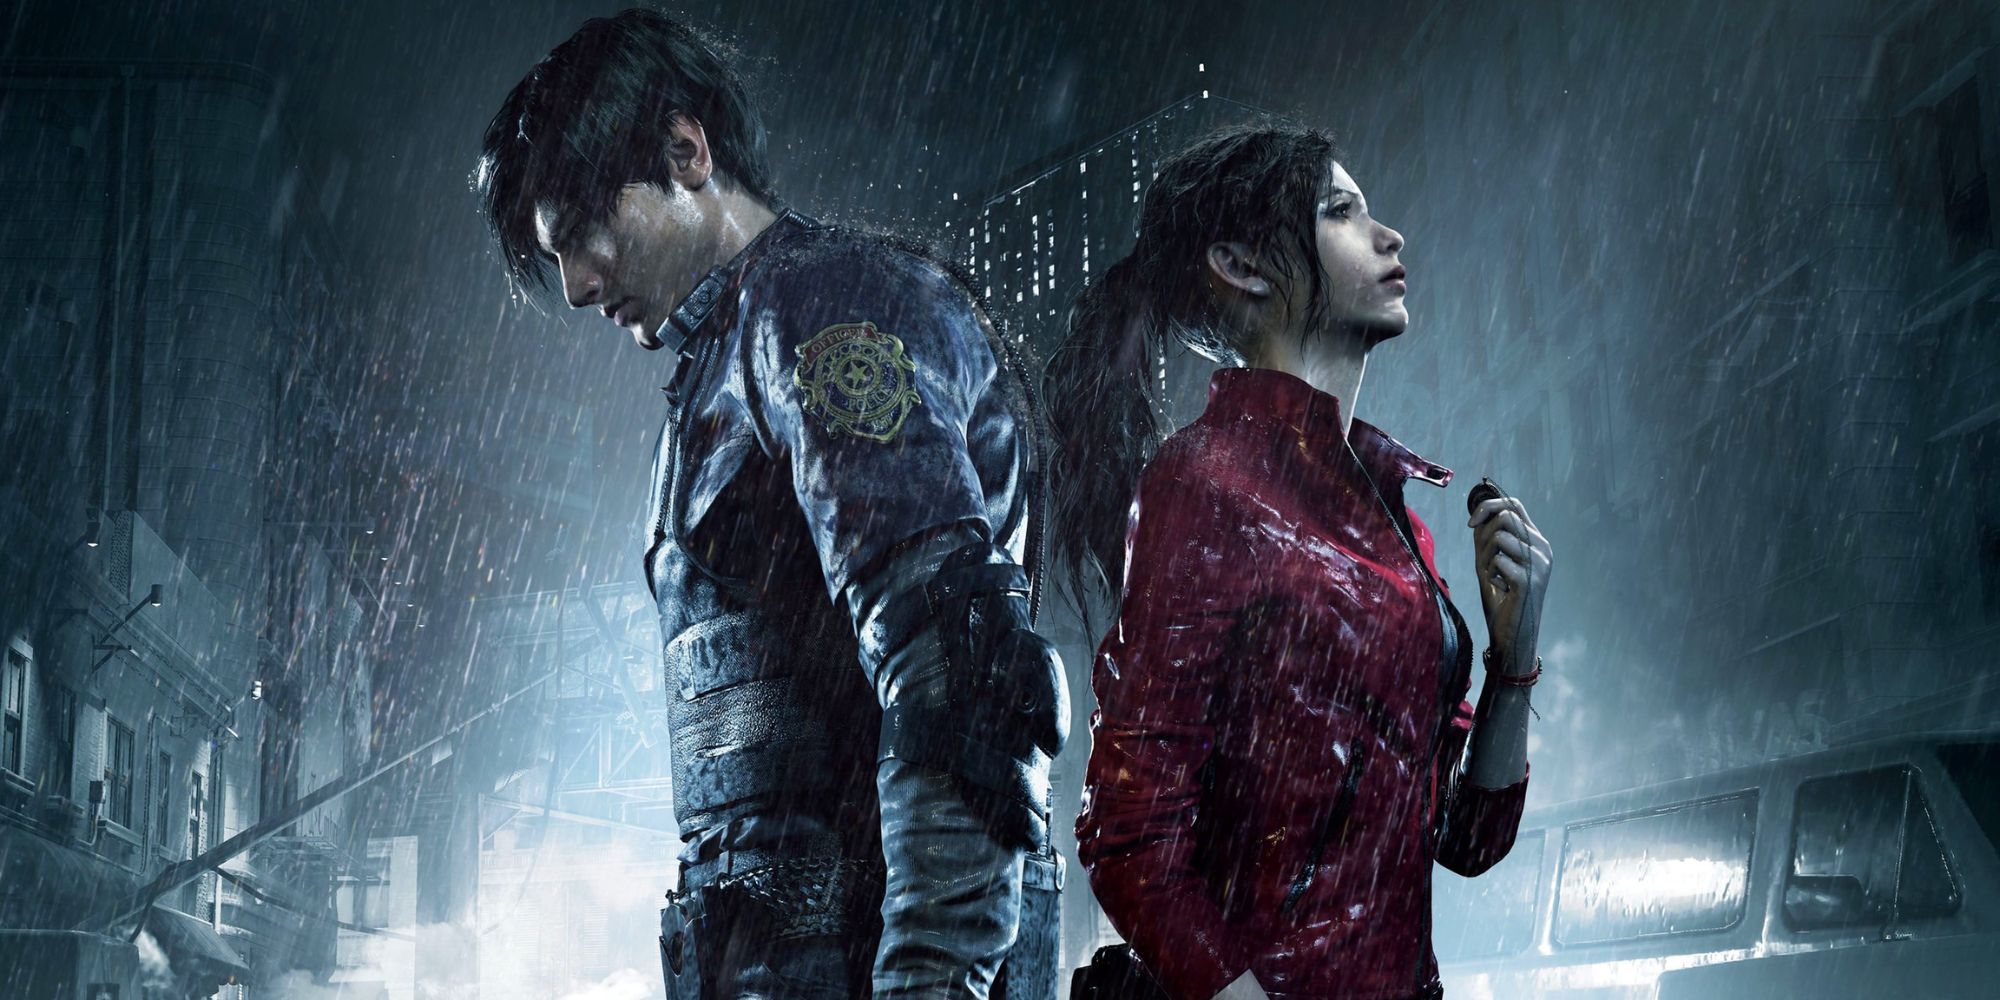 Leon S. Kennedy and Claire Redfield stand in Raccoon City while it rains in Resident Evil 2 Remake.